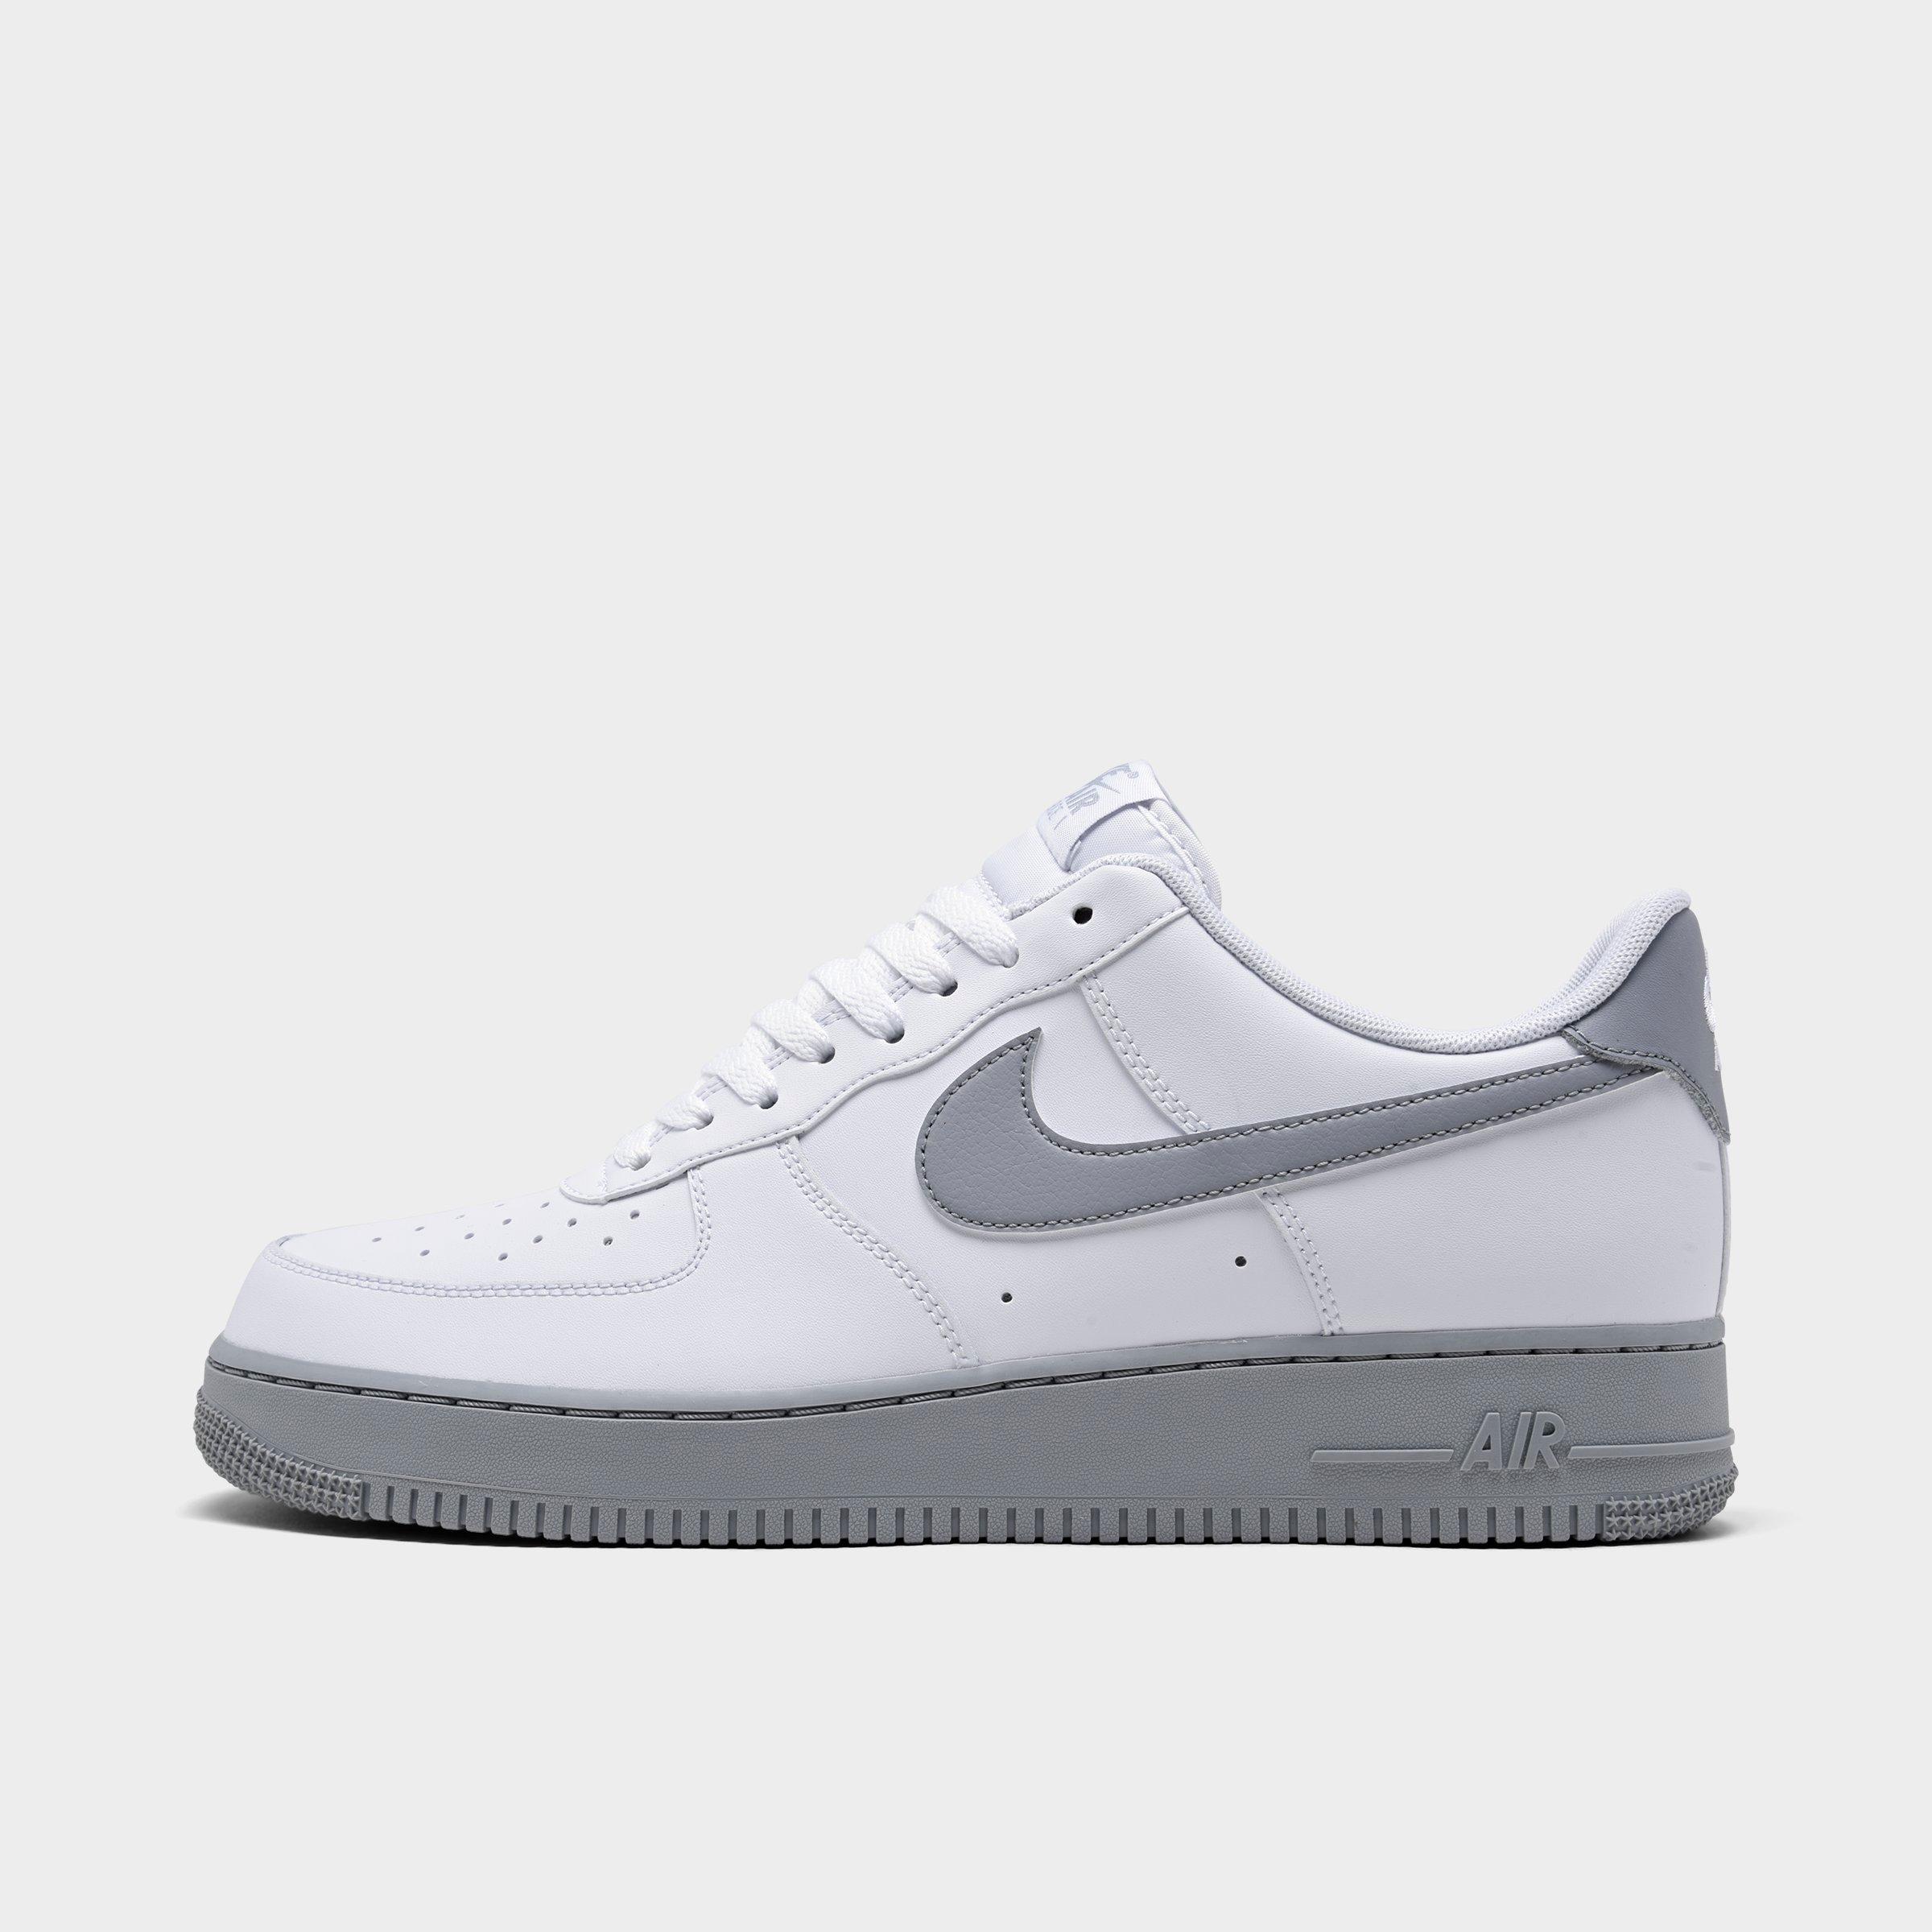 Men's Nike Air Force 1 '07 Casual Shoes 